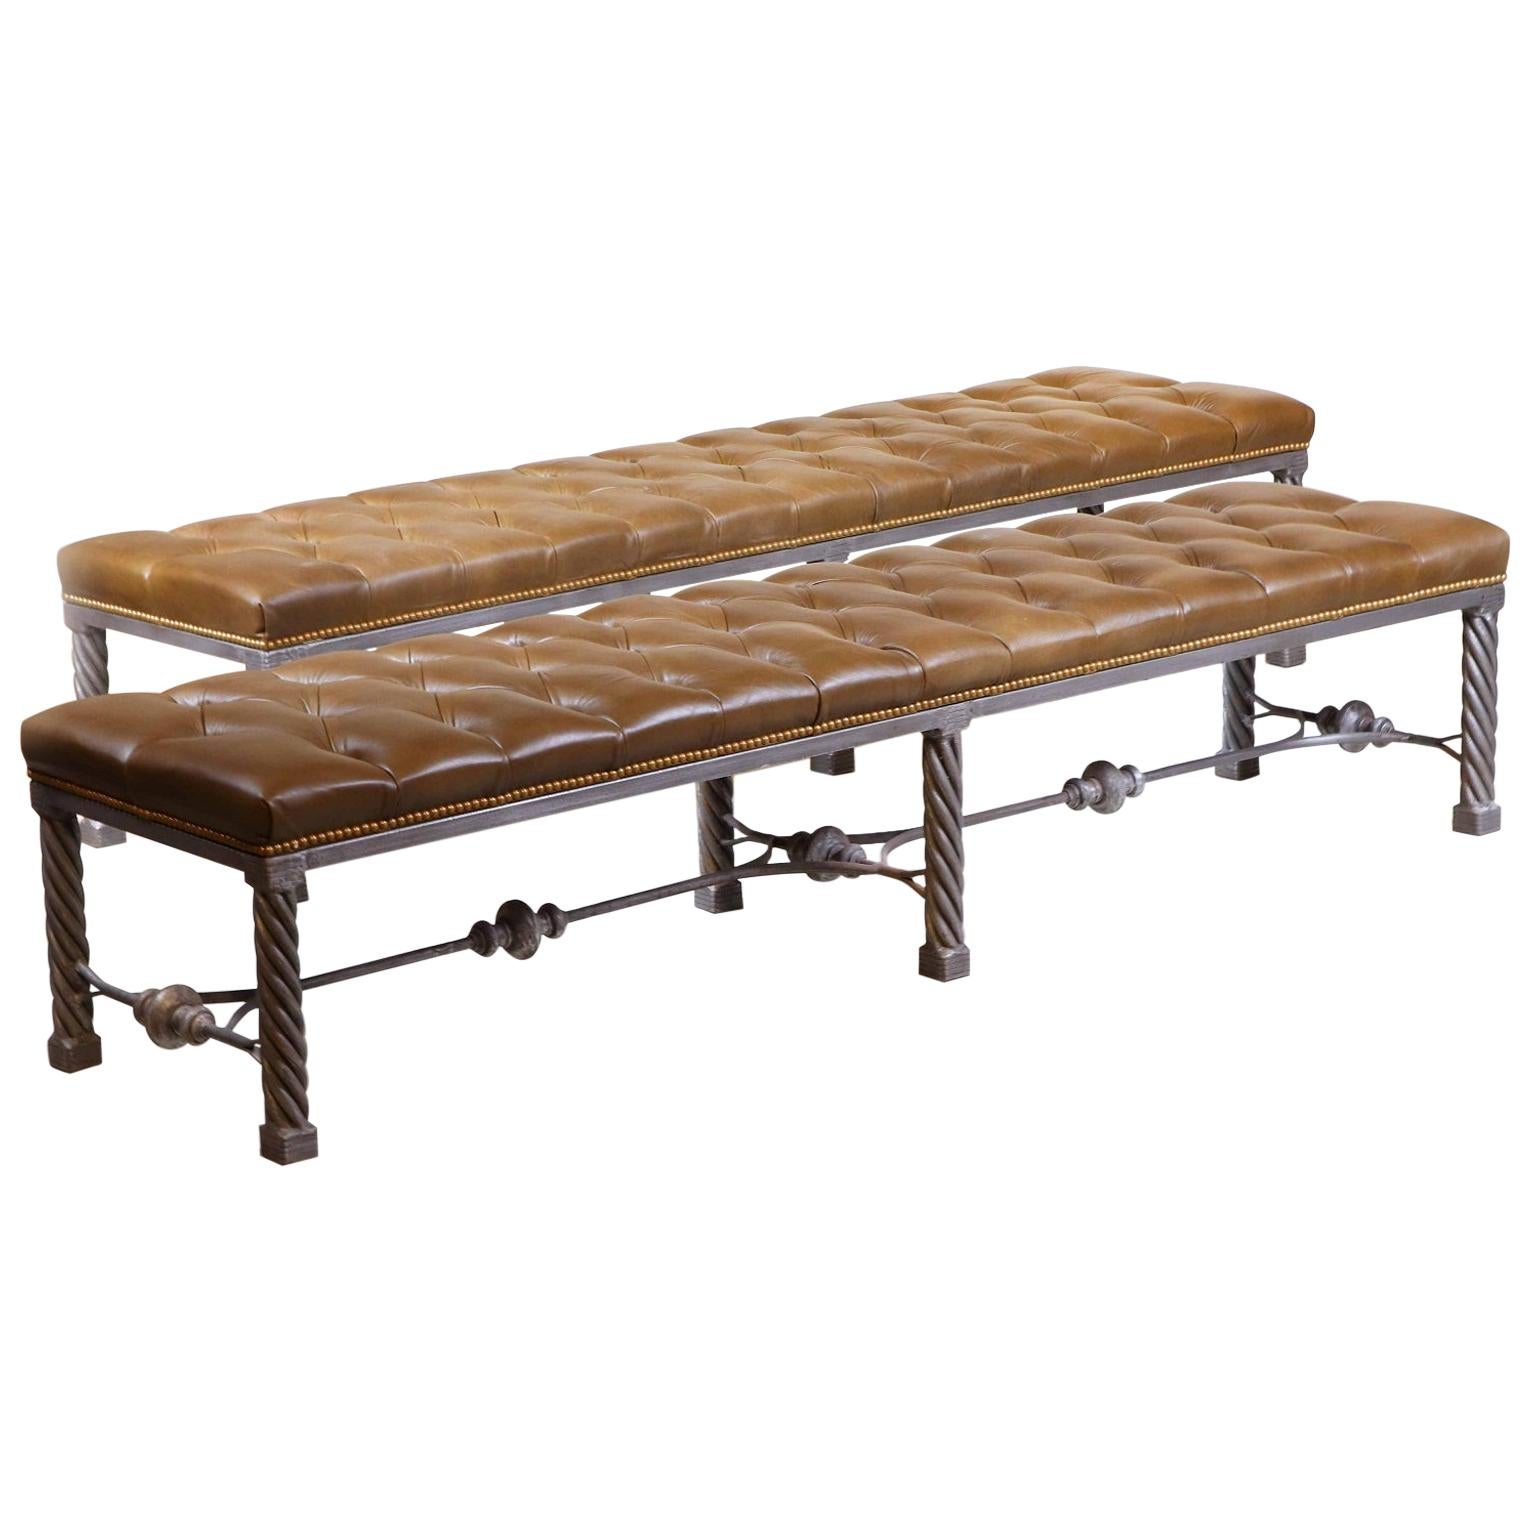 Pair of Long Modern Tufted Leather Benches For Sale